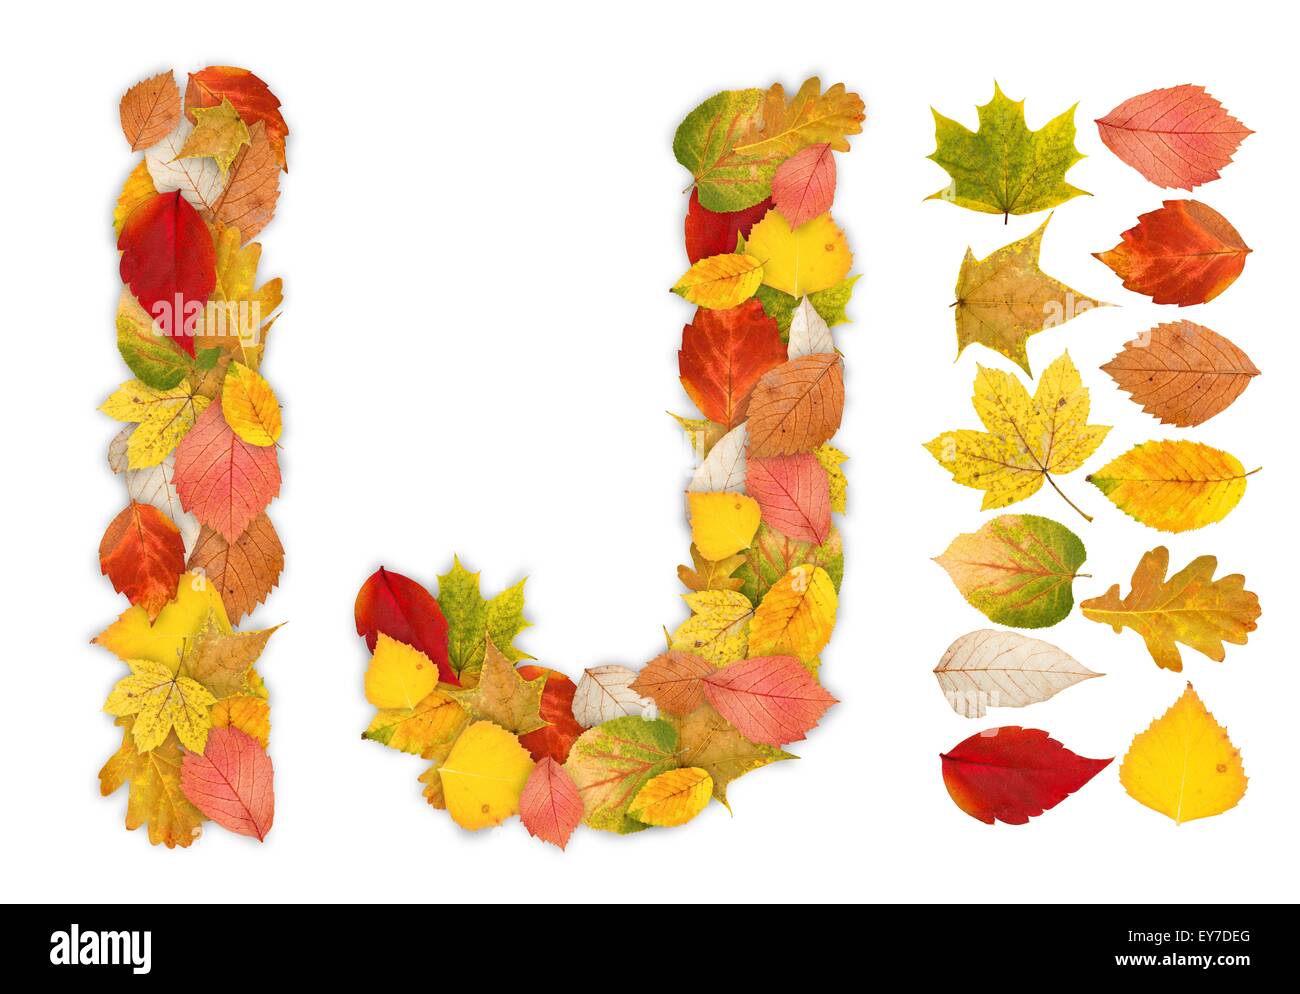 Characters I and J made of colorful autumn leaves. Standalone design elements attached Stock Photo